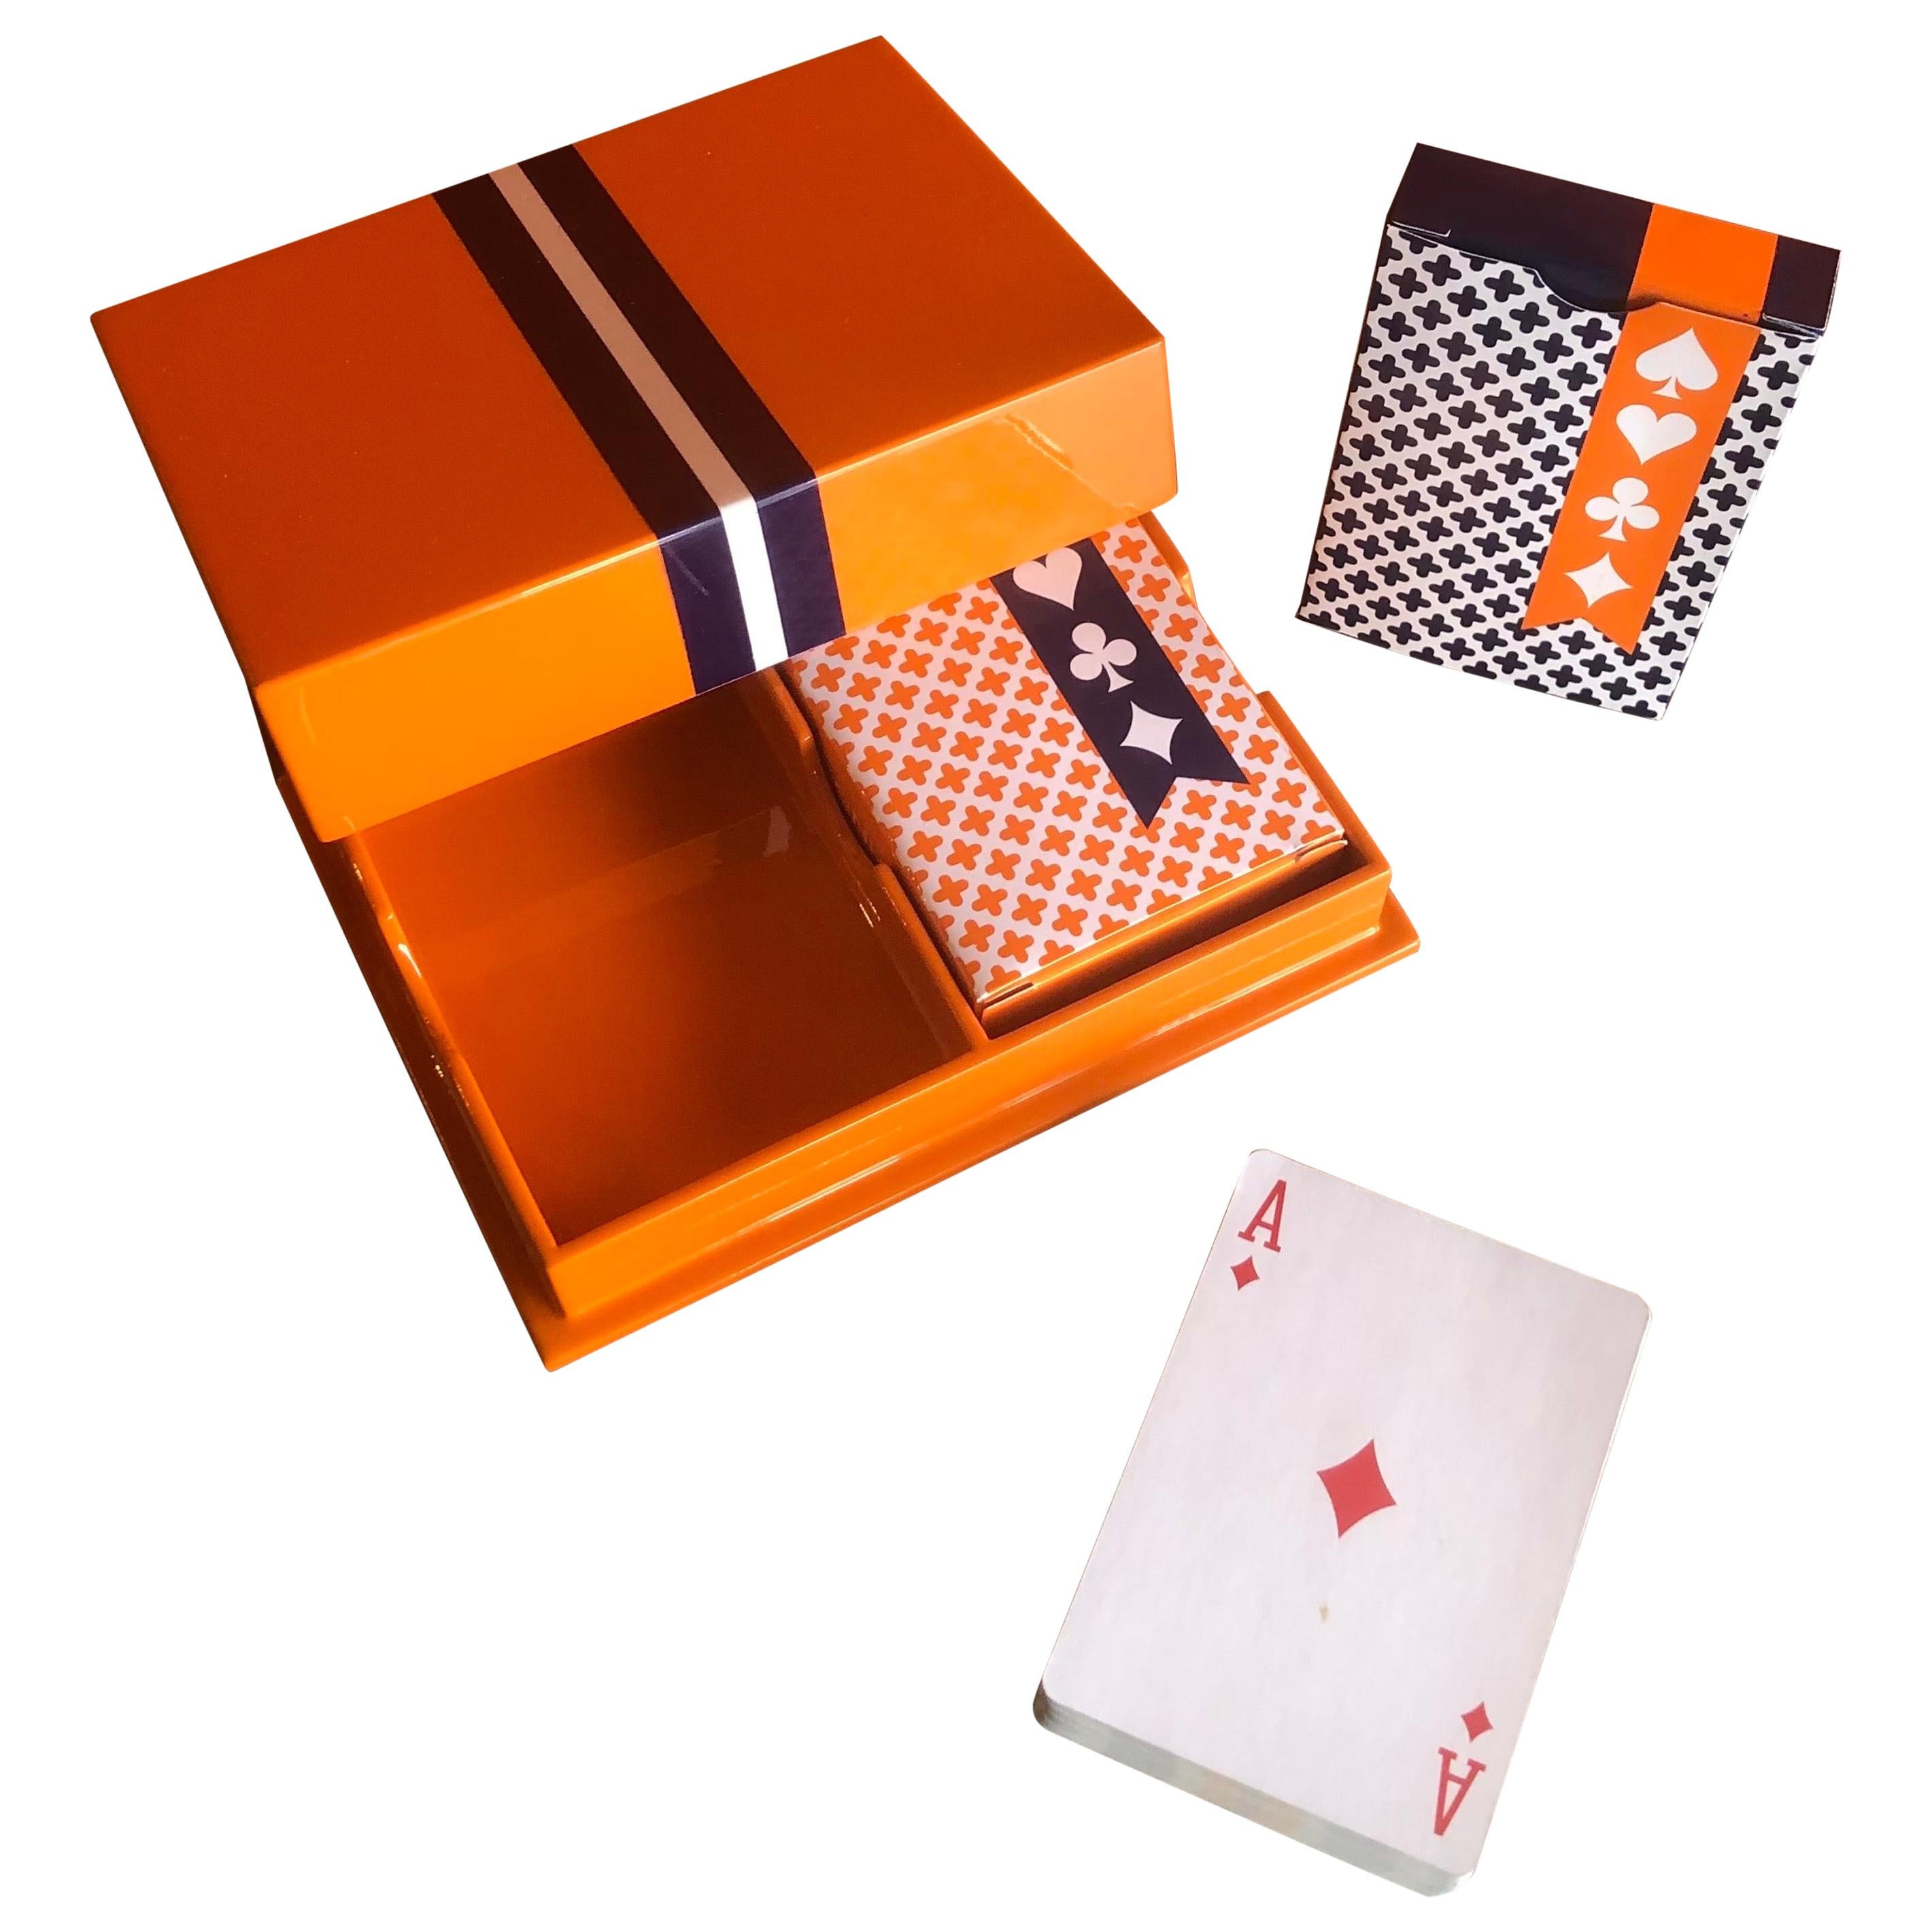 Playing Cards Set in Box by Jonathan Adler For Sale